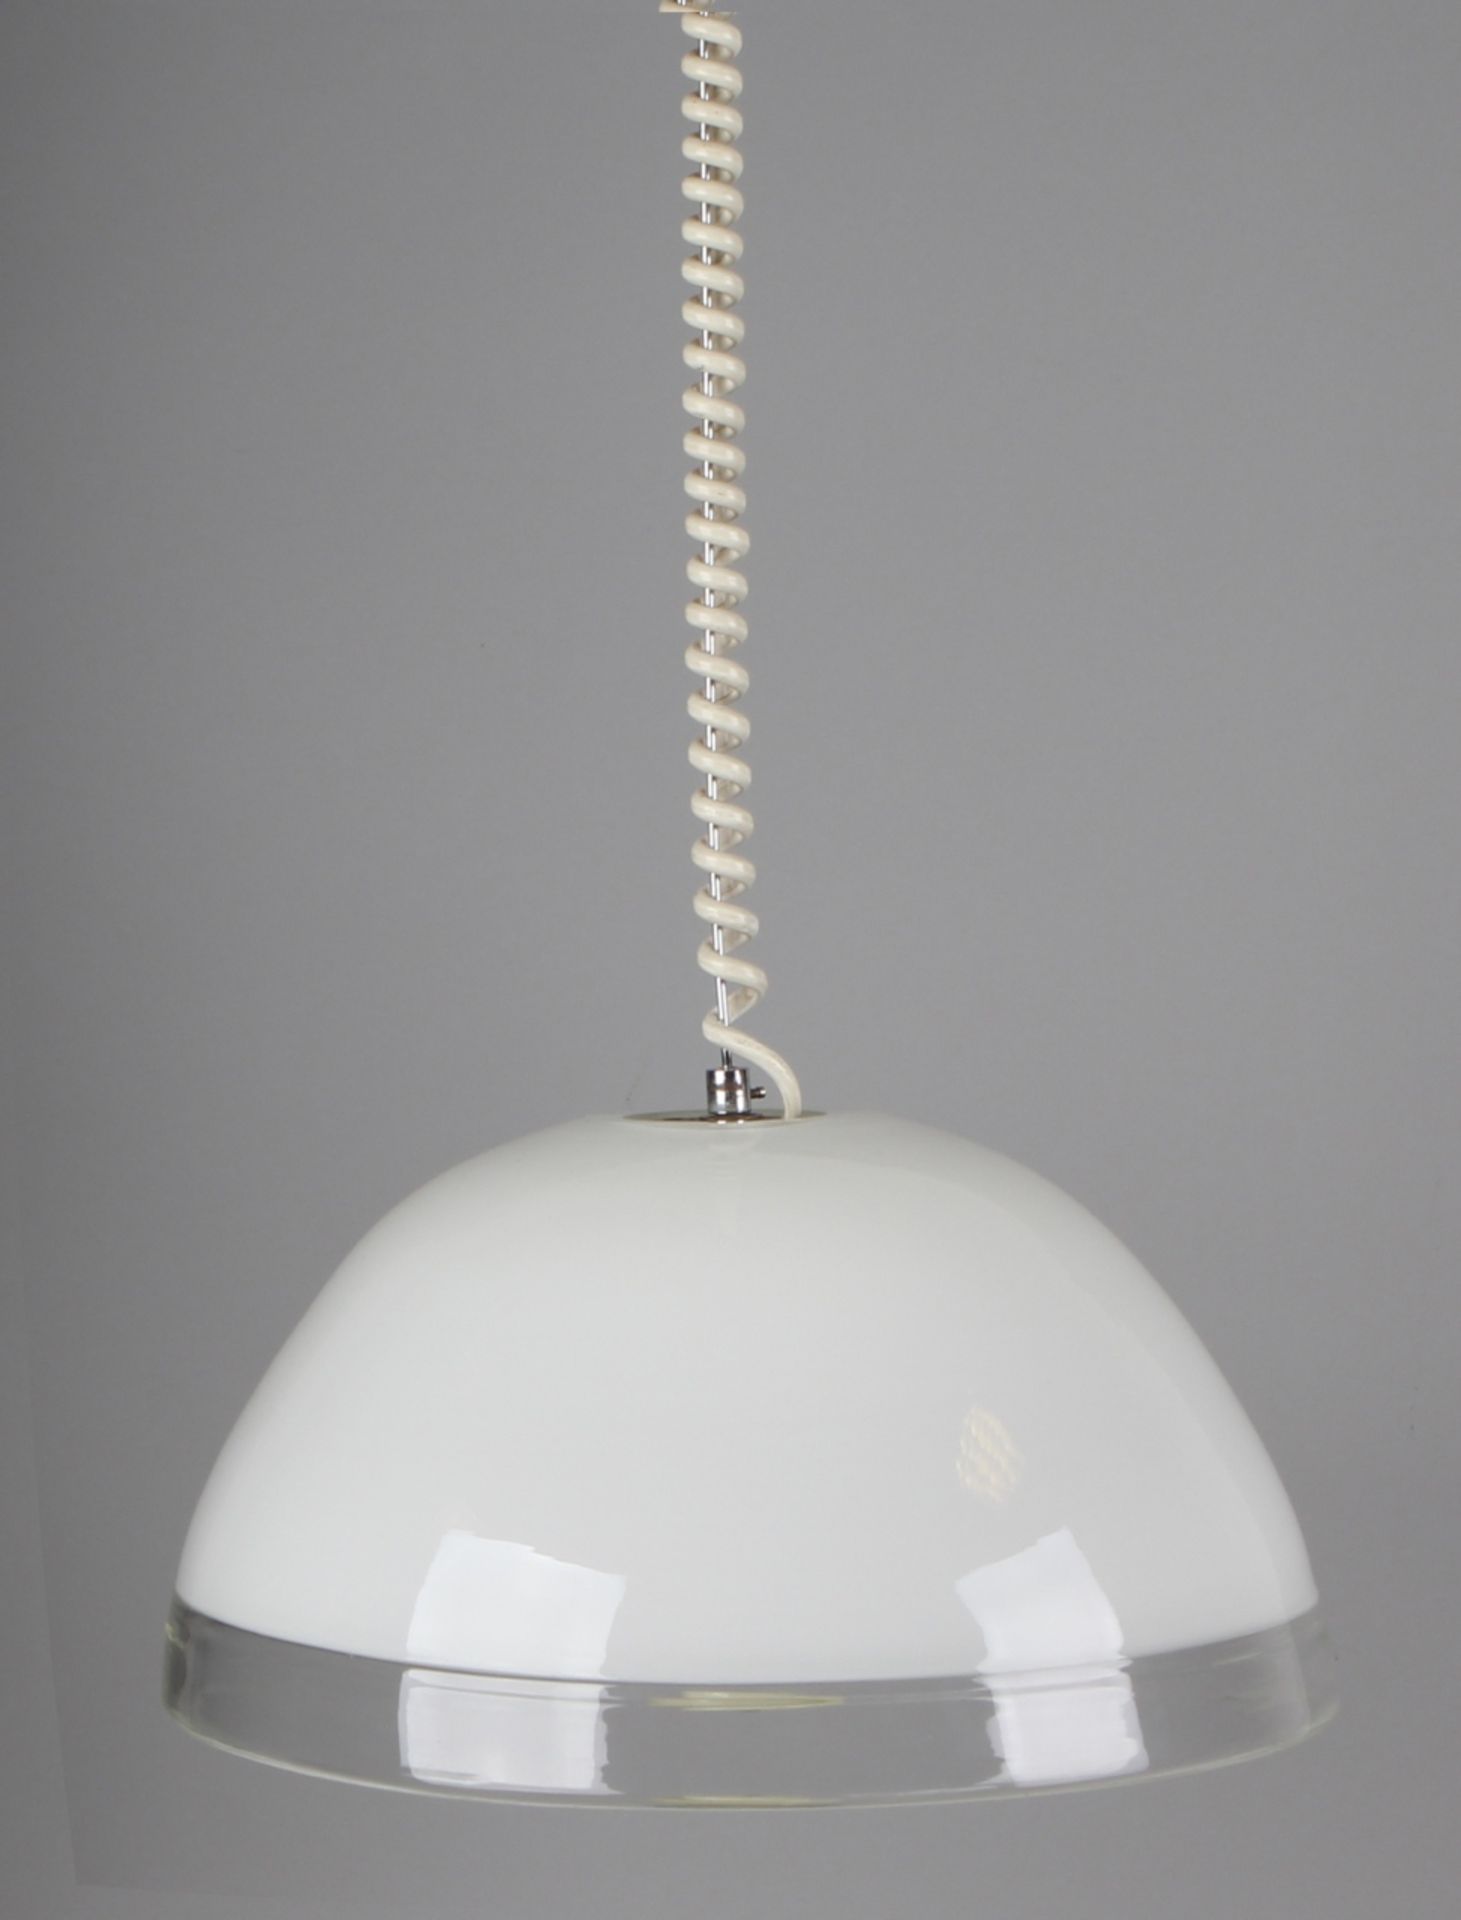 Italian glass design lamp, thick glass, white and transparent, about 1cm thick with chrome, circa